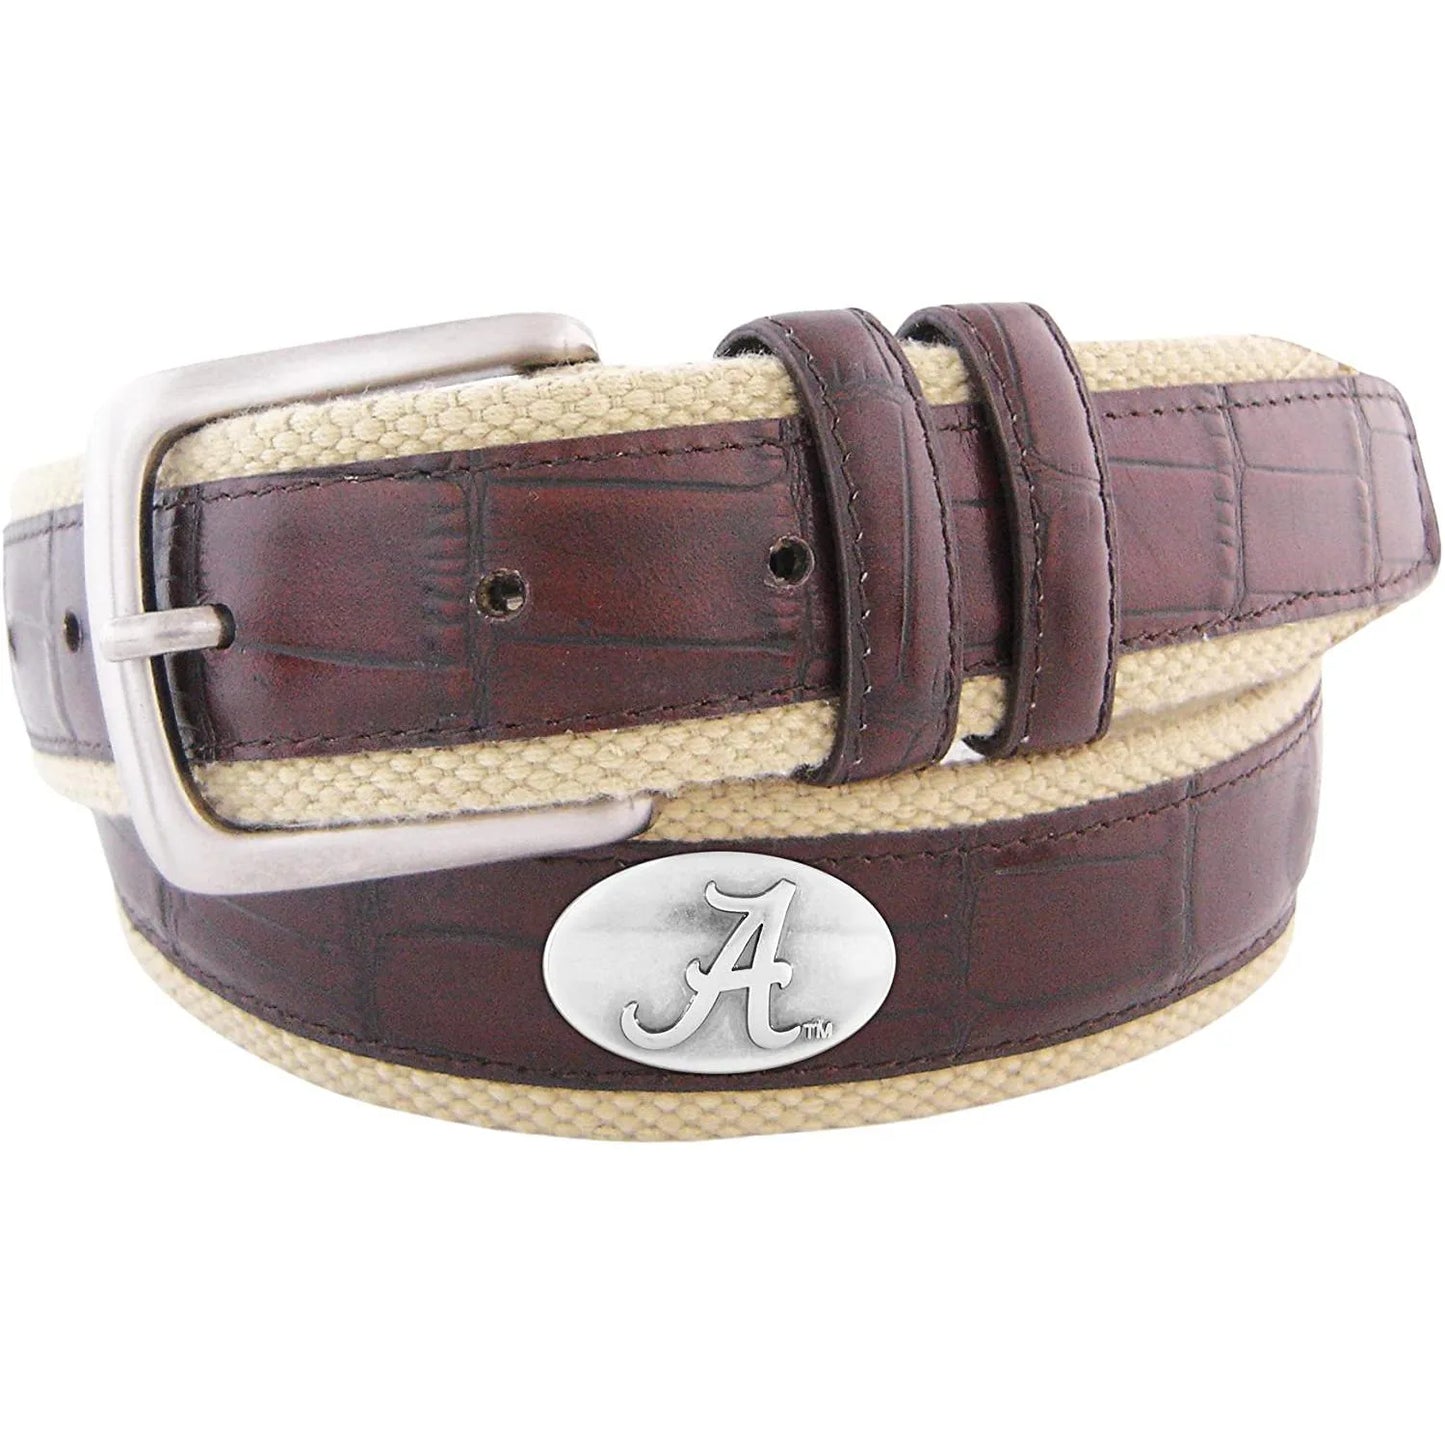 Zeppro Concho Leather Croc with Buff Canvas